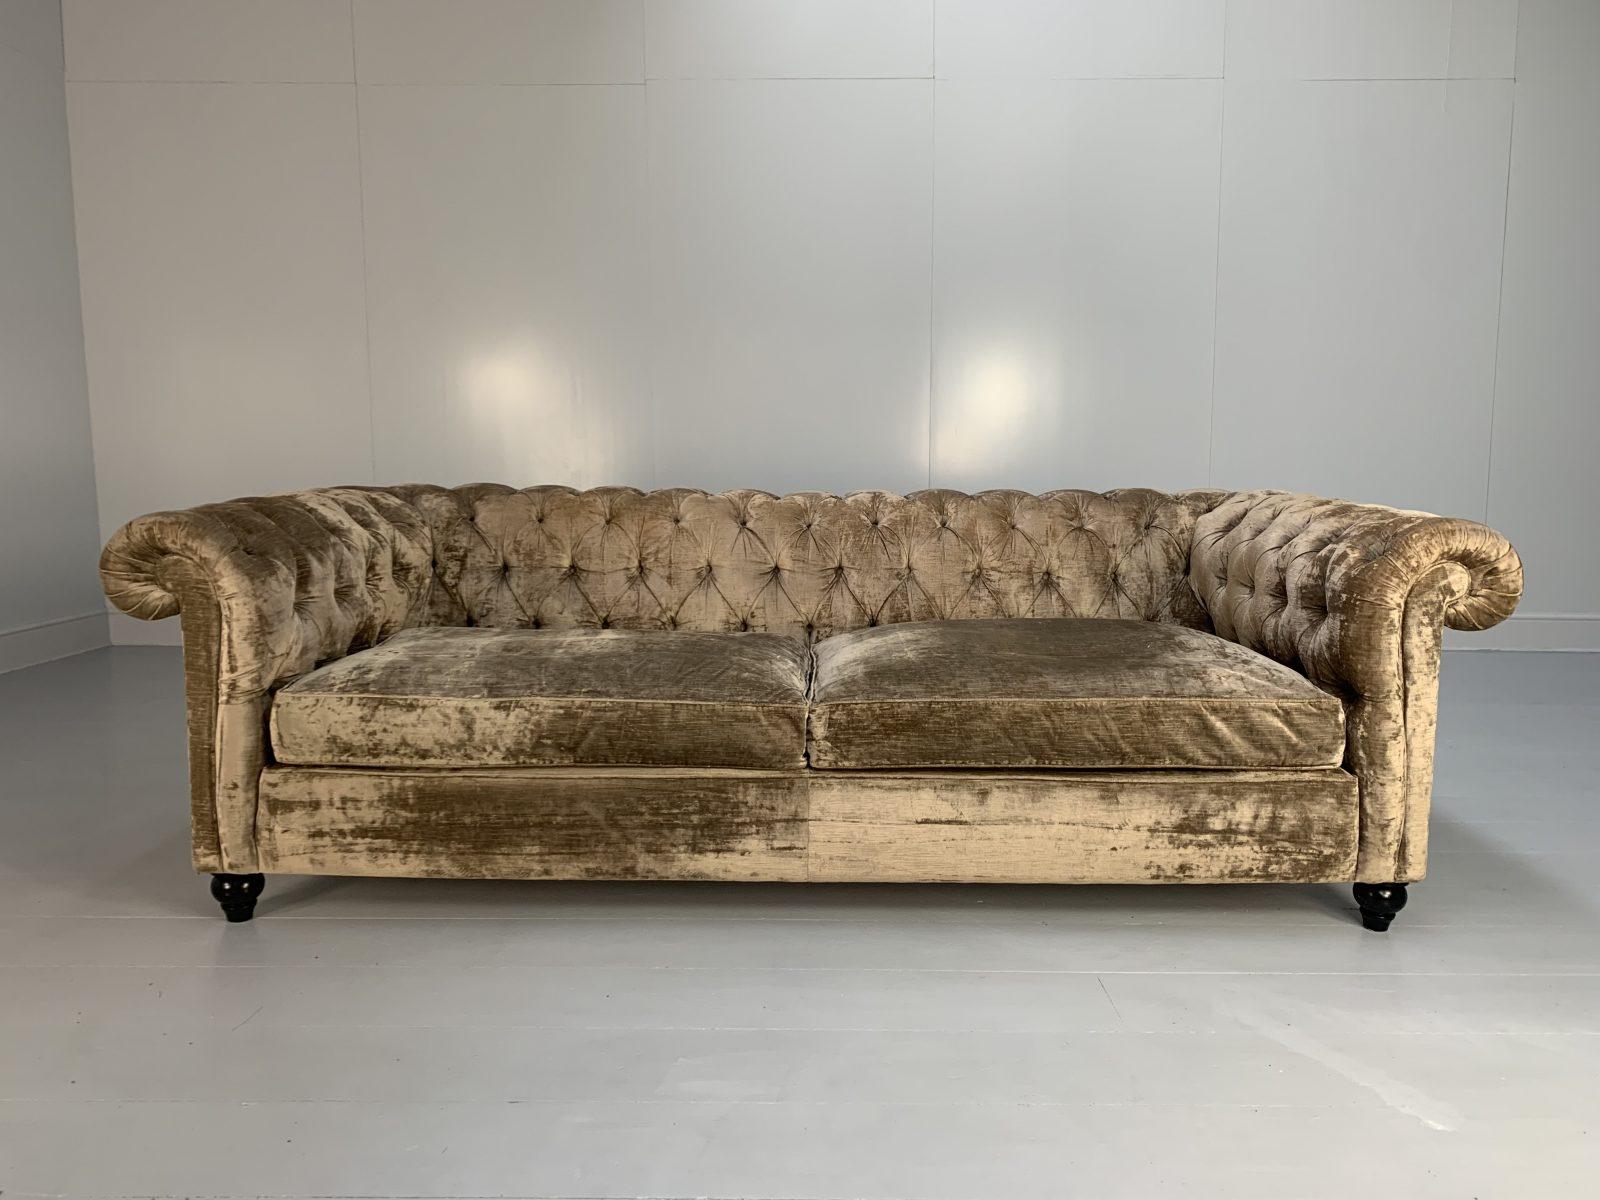 Hello Friends, and welcome to another unmissable offering from Lord Browns Furniture, the UK’s premier resource for fine Sofas and Chairs.

On offer on this occasion is a superb, majestic Duresta “Connaught” Grand 4-Seat Chesterfield Sofa, dressed